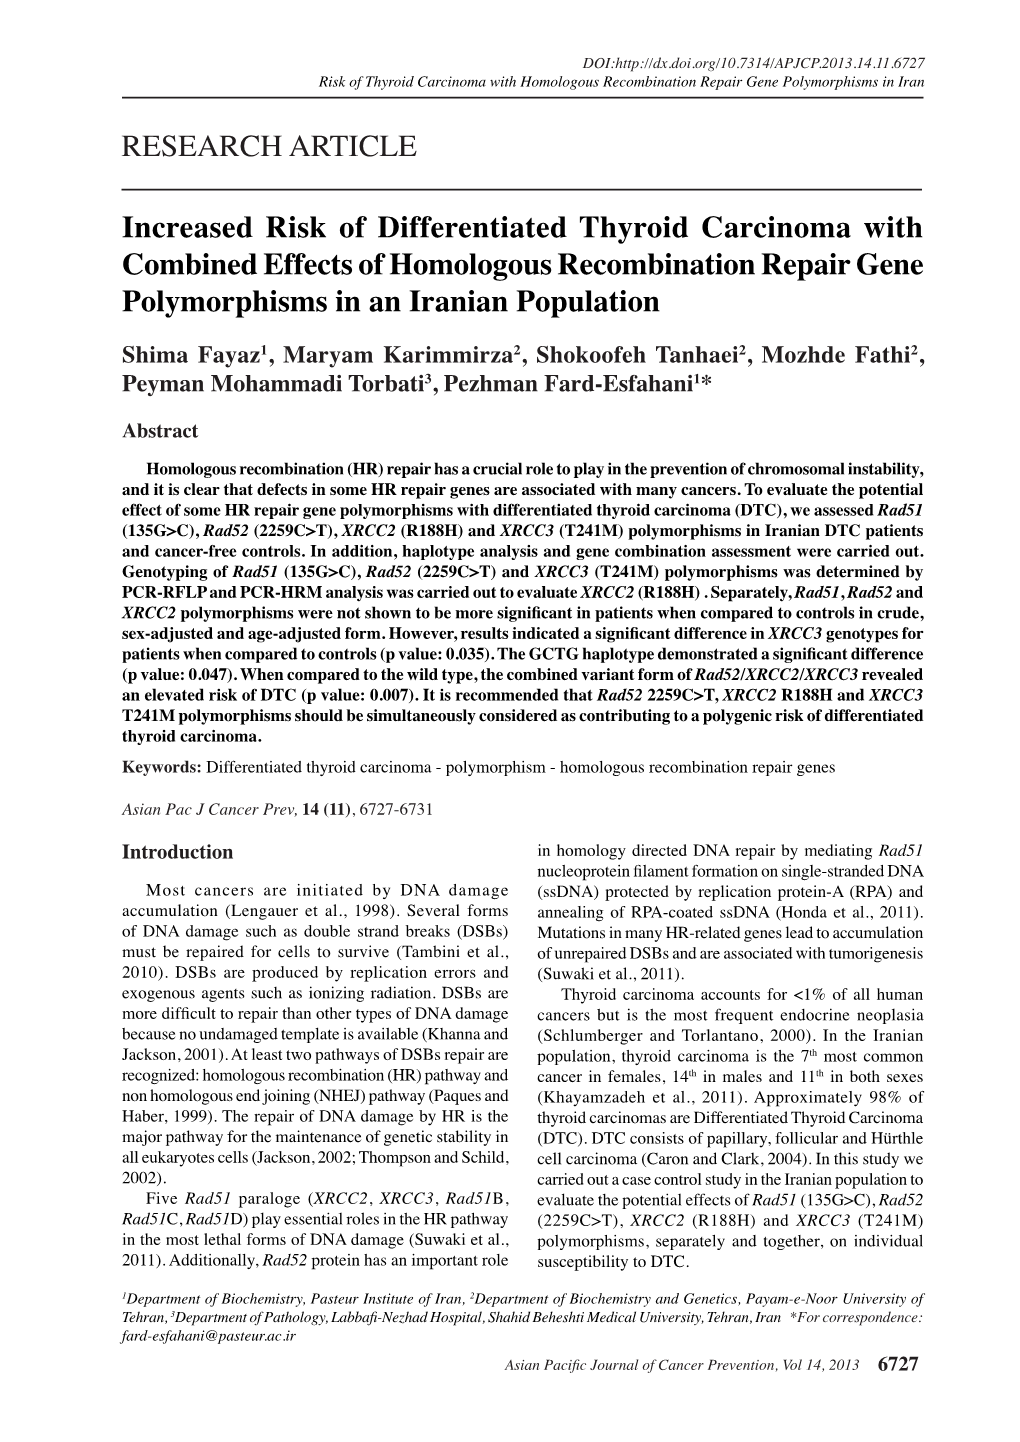 Increased Risk of Differentiated Thyroid Carcinoma with Combined Effects of Homologous Recombination Repair Gene Polymorphisms in an Iranian Population